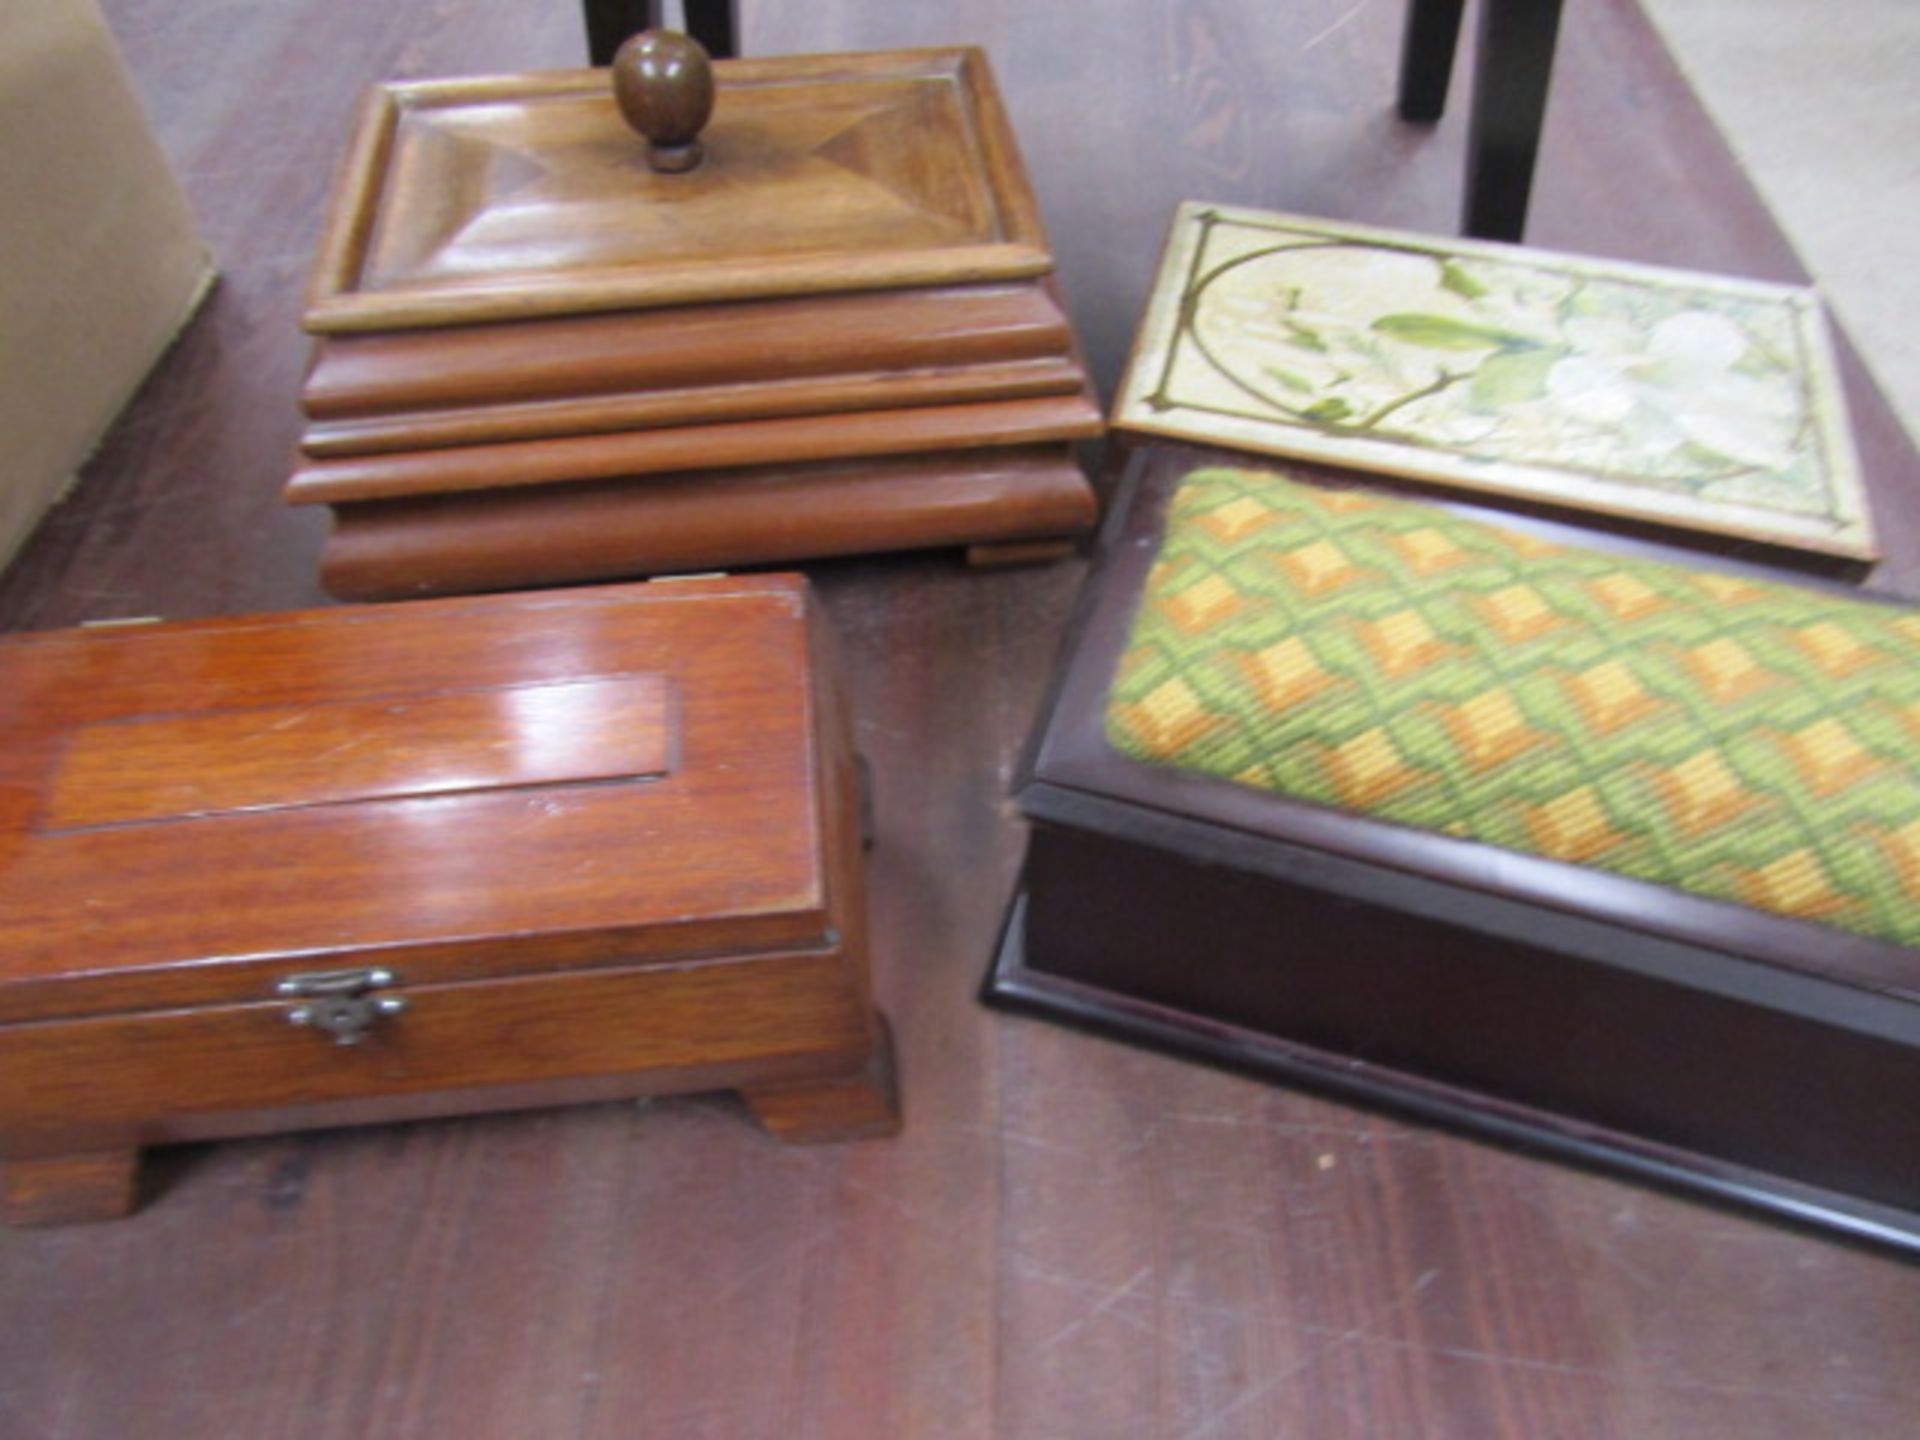 Sewing boxes, one cantilever plus 2 pictures - Image 4 of 9